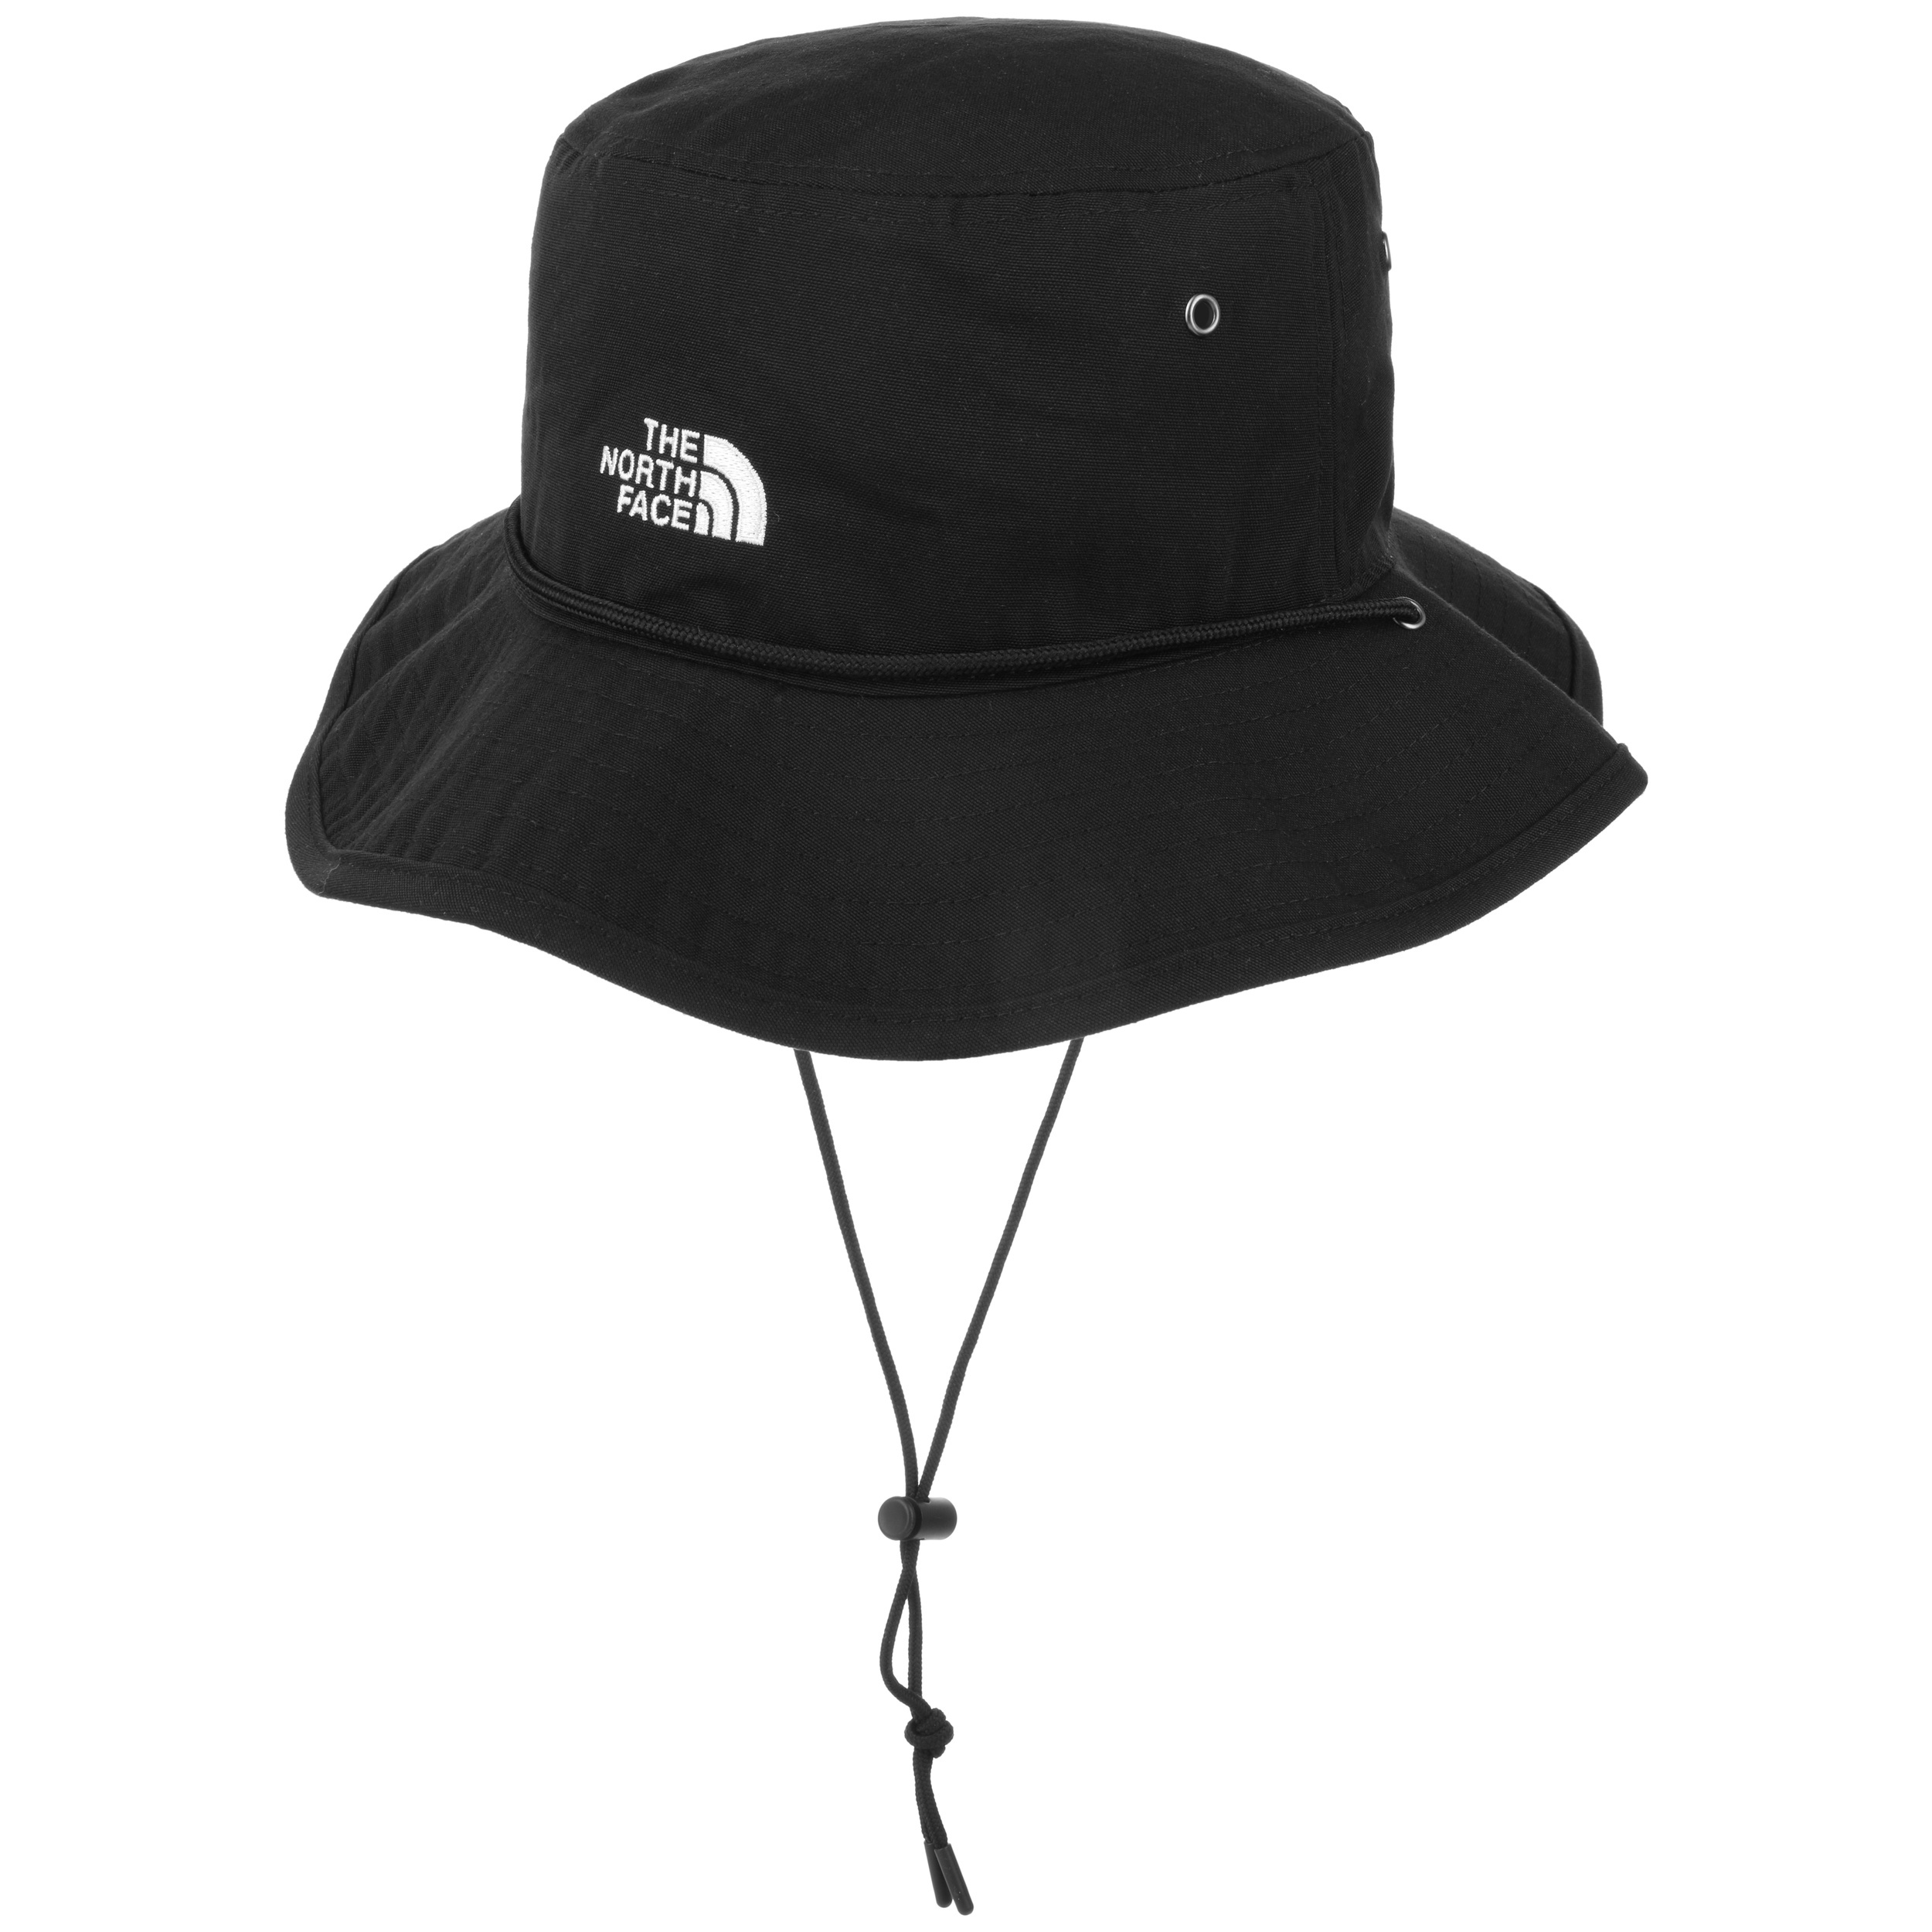 https://img.hatshopping.com/Recycled-66-Brimmer-Sun-Hat-by-The-North-Face.62727a.jpg